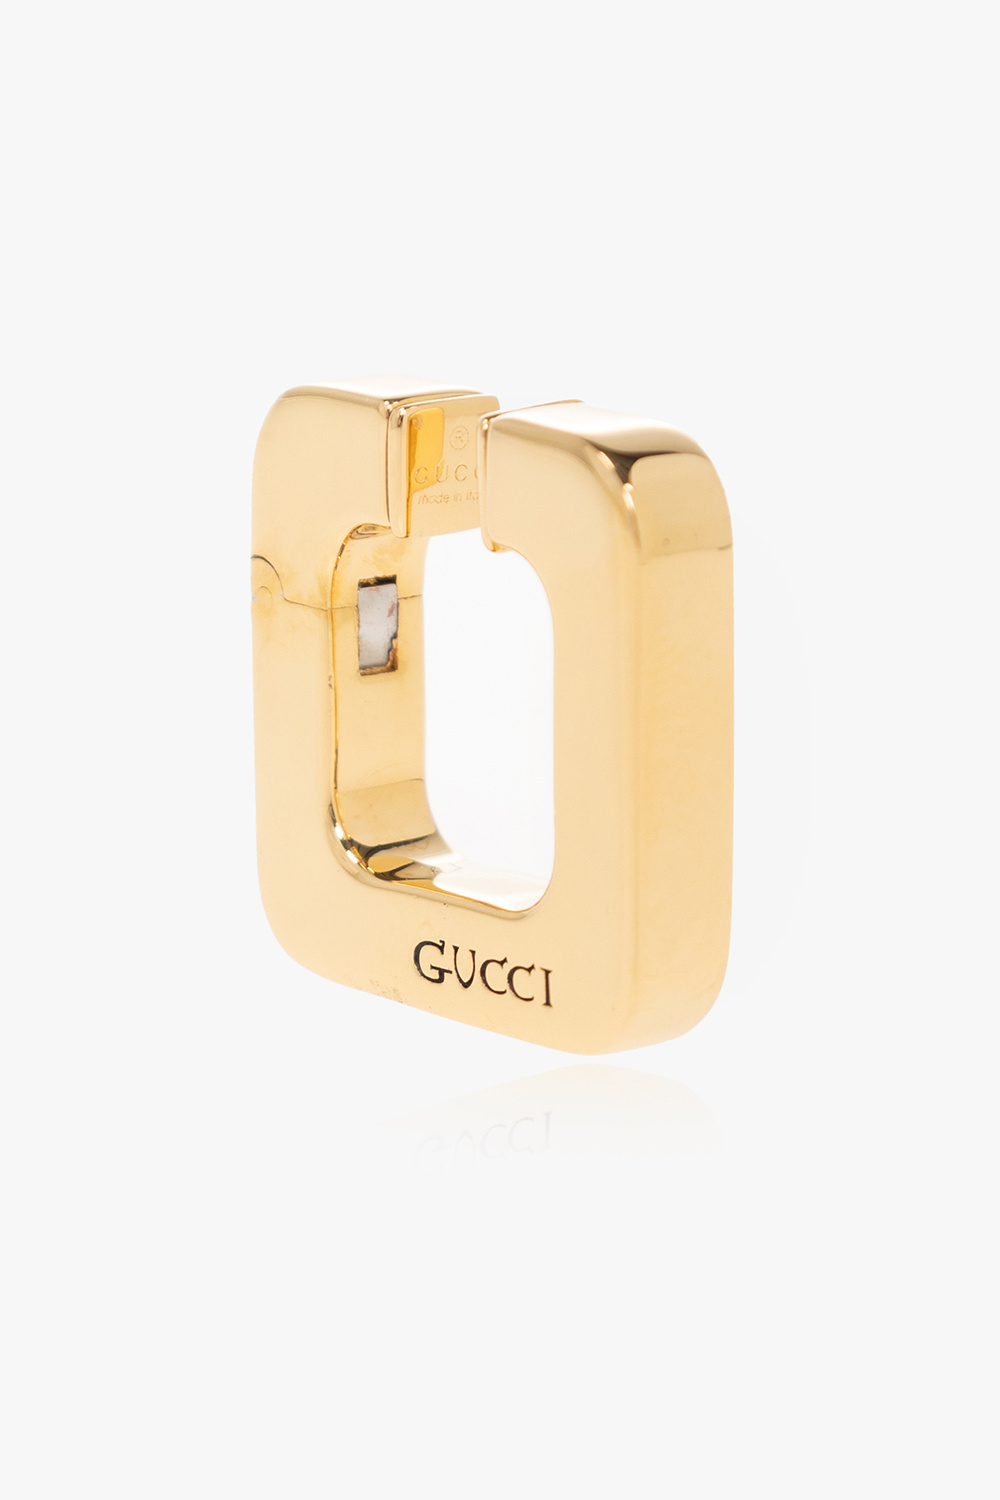 Gucci branding on temples - Gold Ear cuff with logo Gucci -  InteragencyboardShops HK